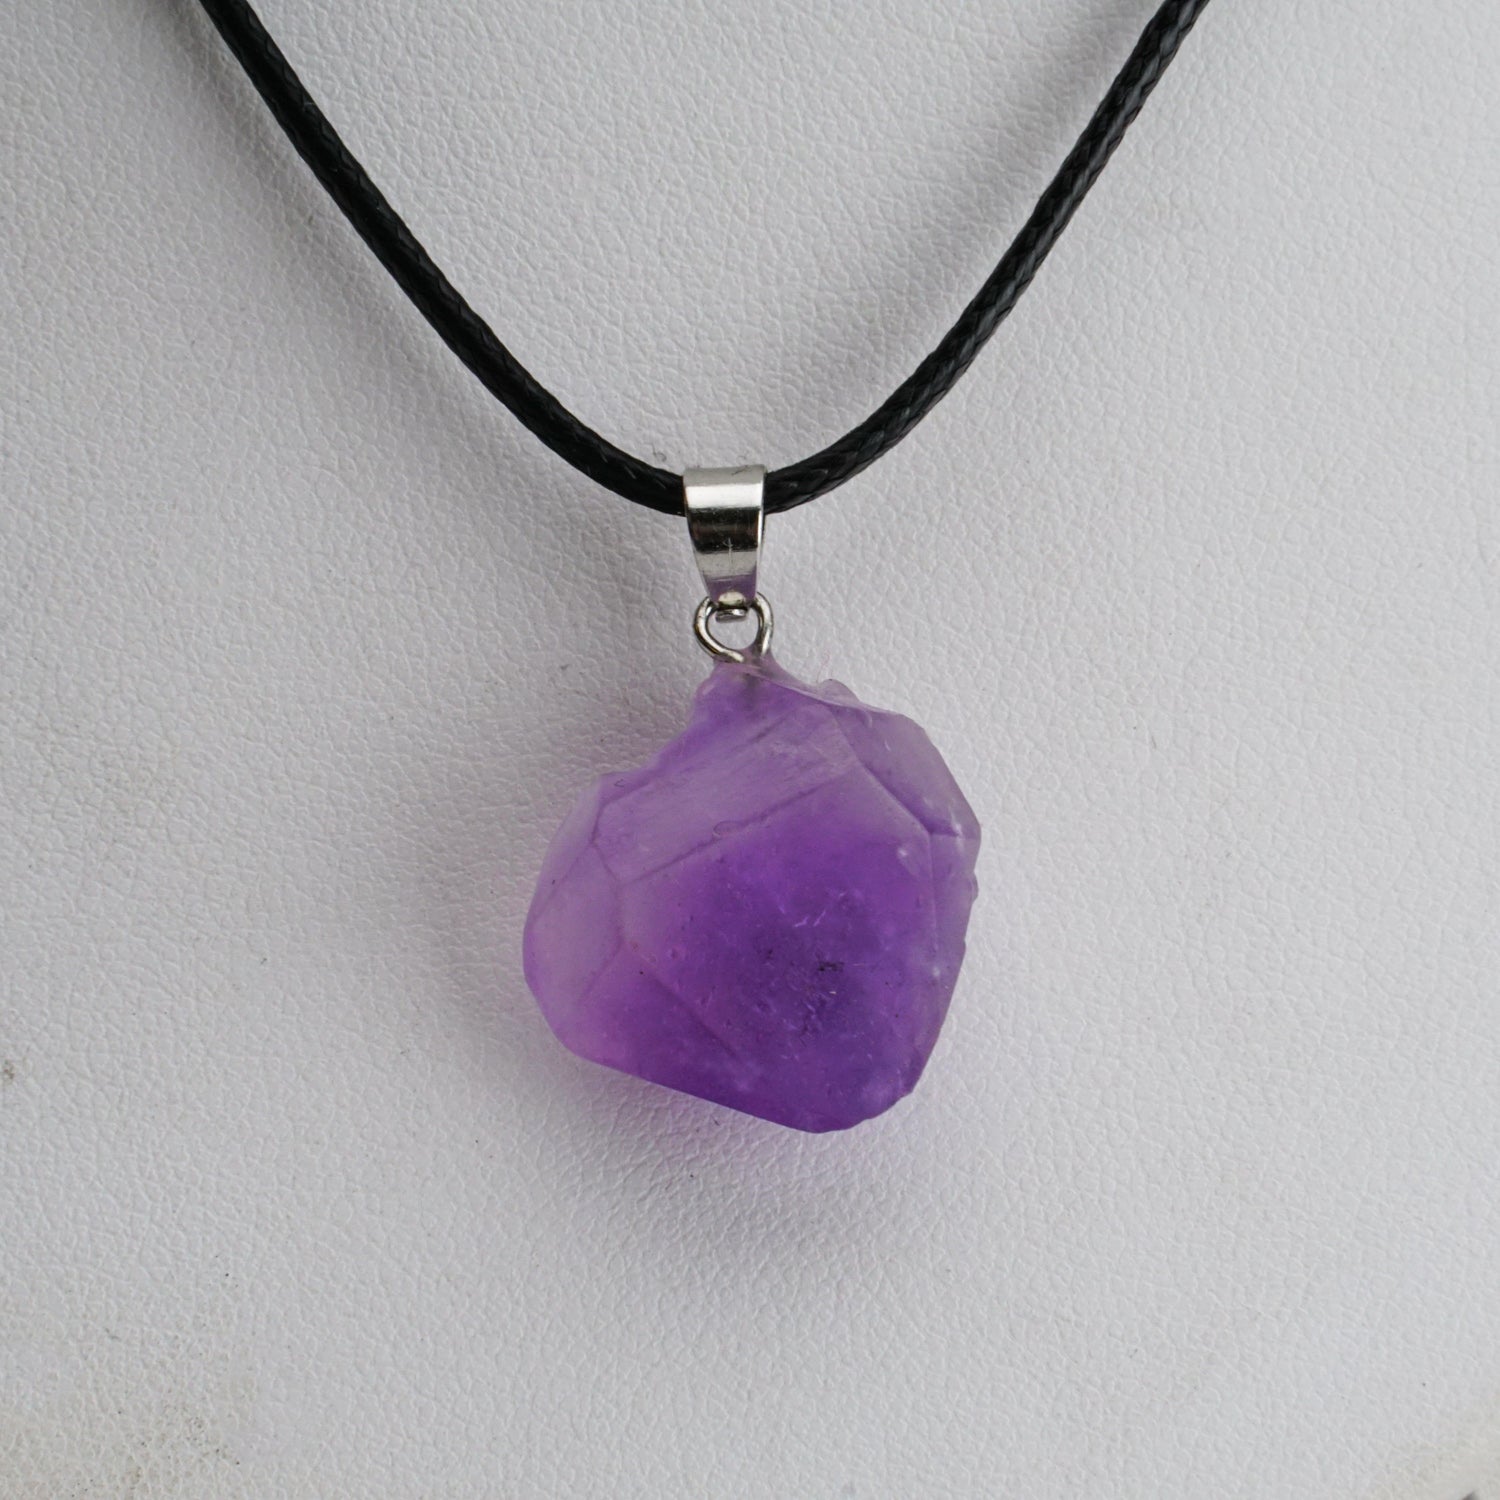 Genuine Amethyst Pendant with Adjustable Cord Necklace